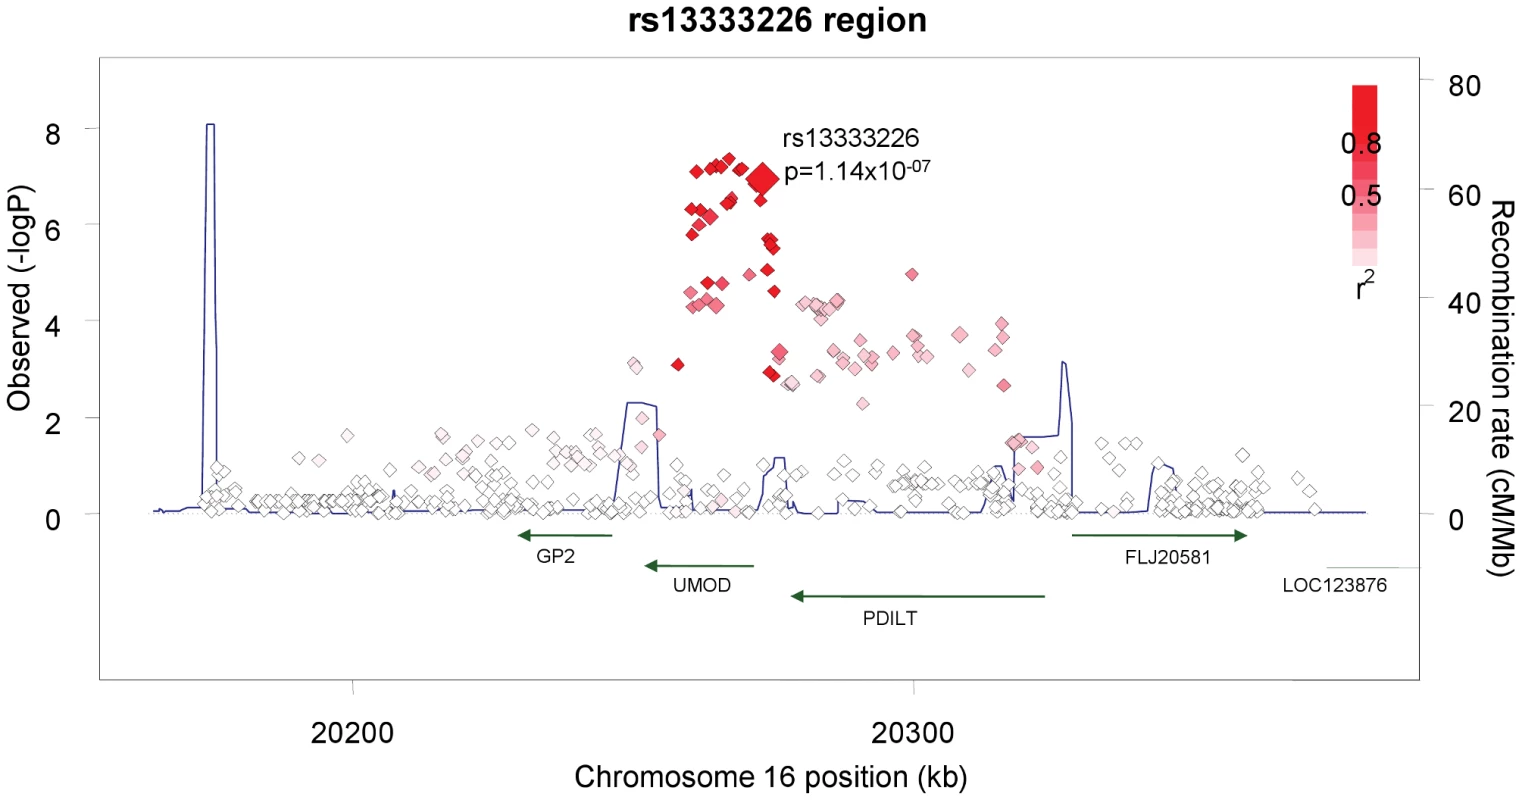 Association plot of the genomic region around rs13333226 showing both typed and imputed SNPs with location of genes and recombination rate.